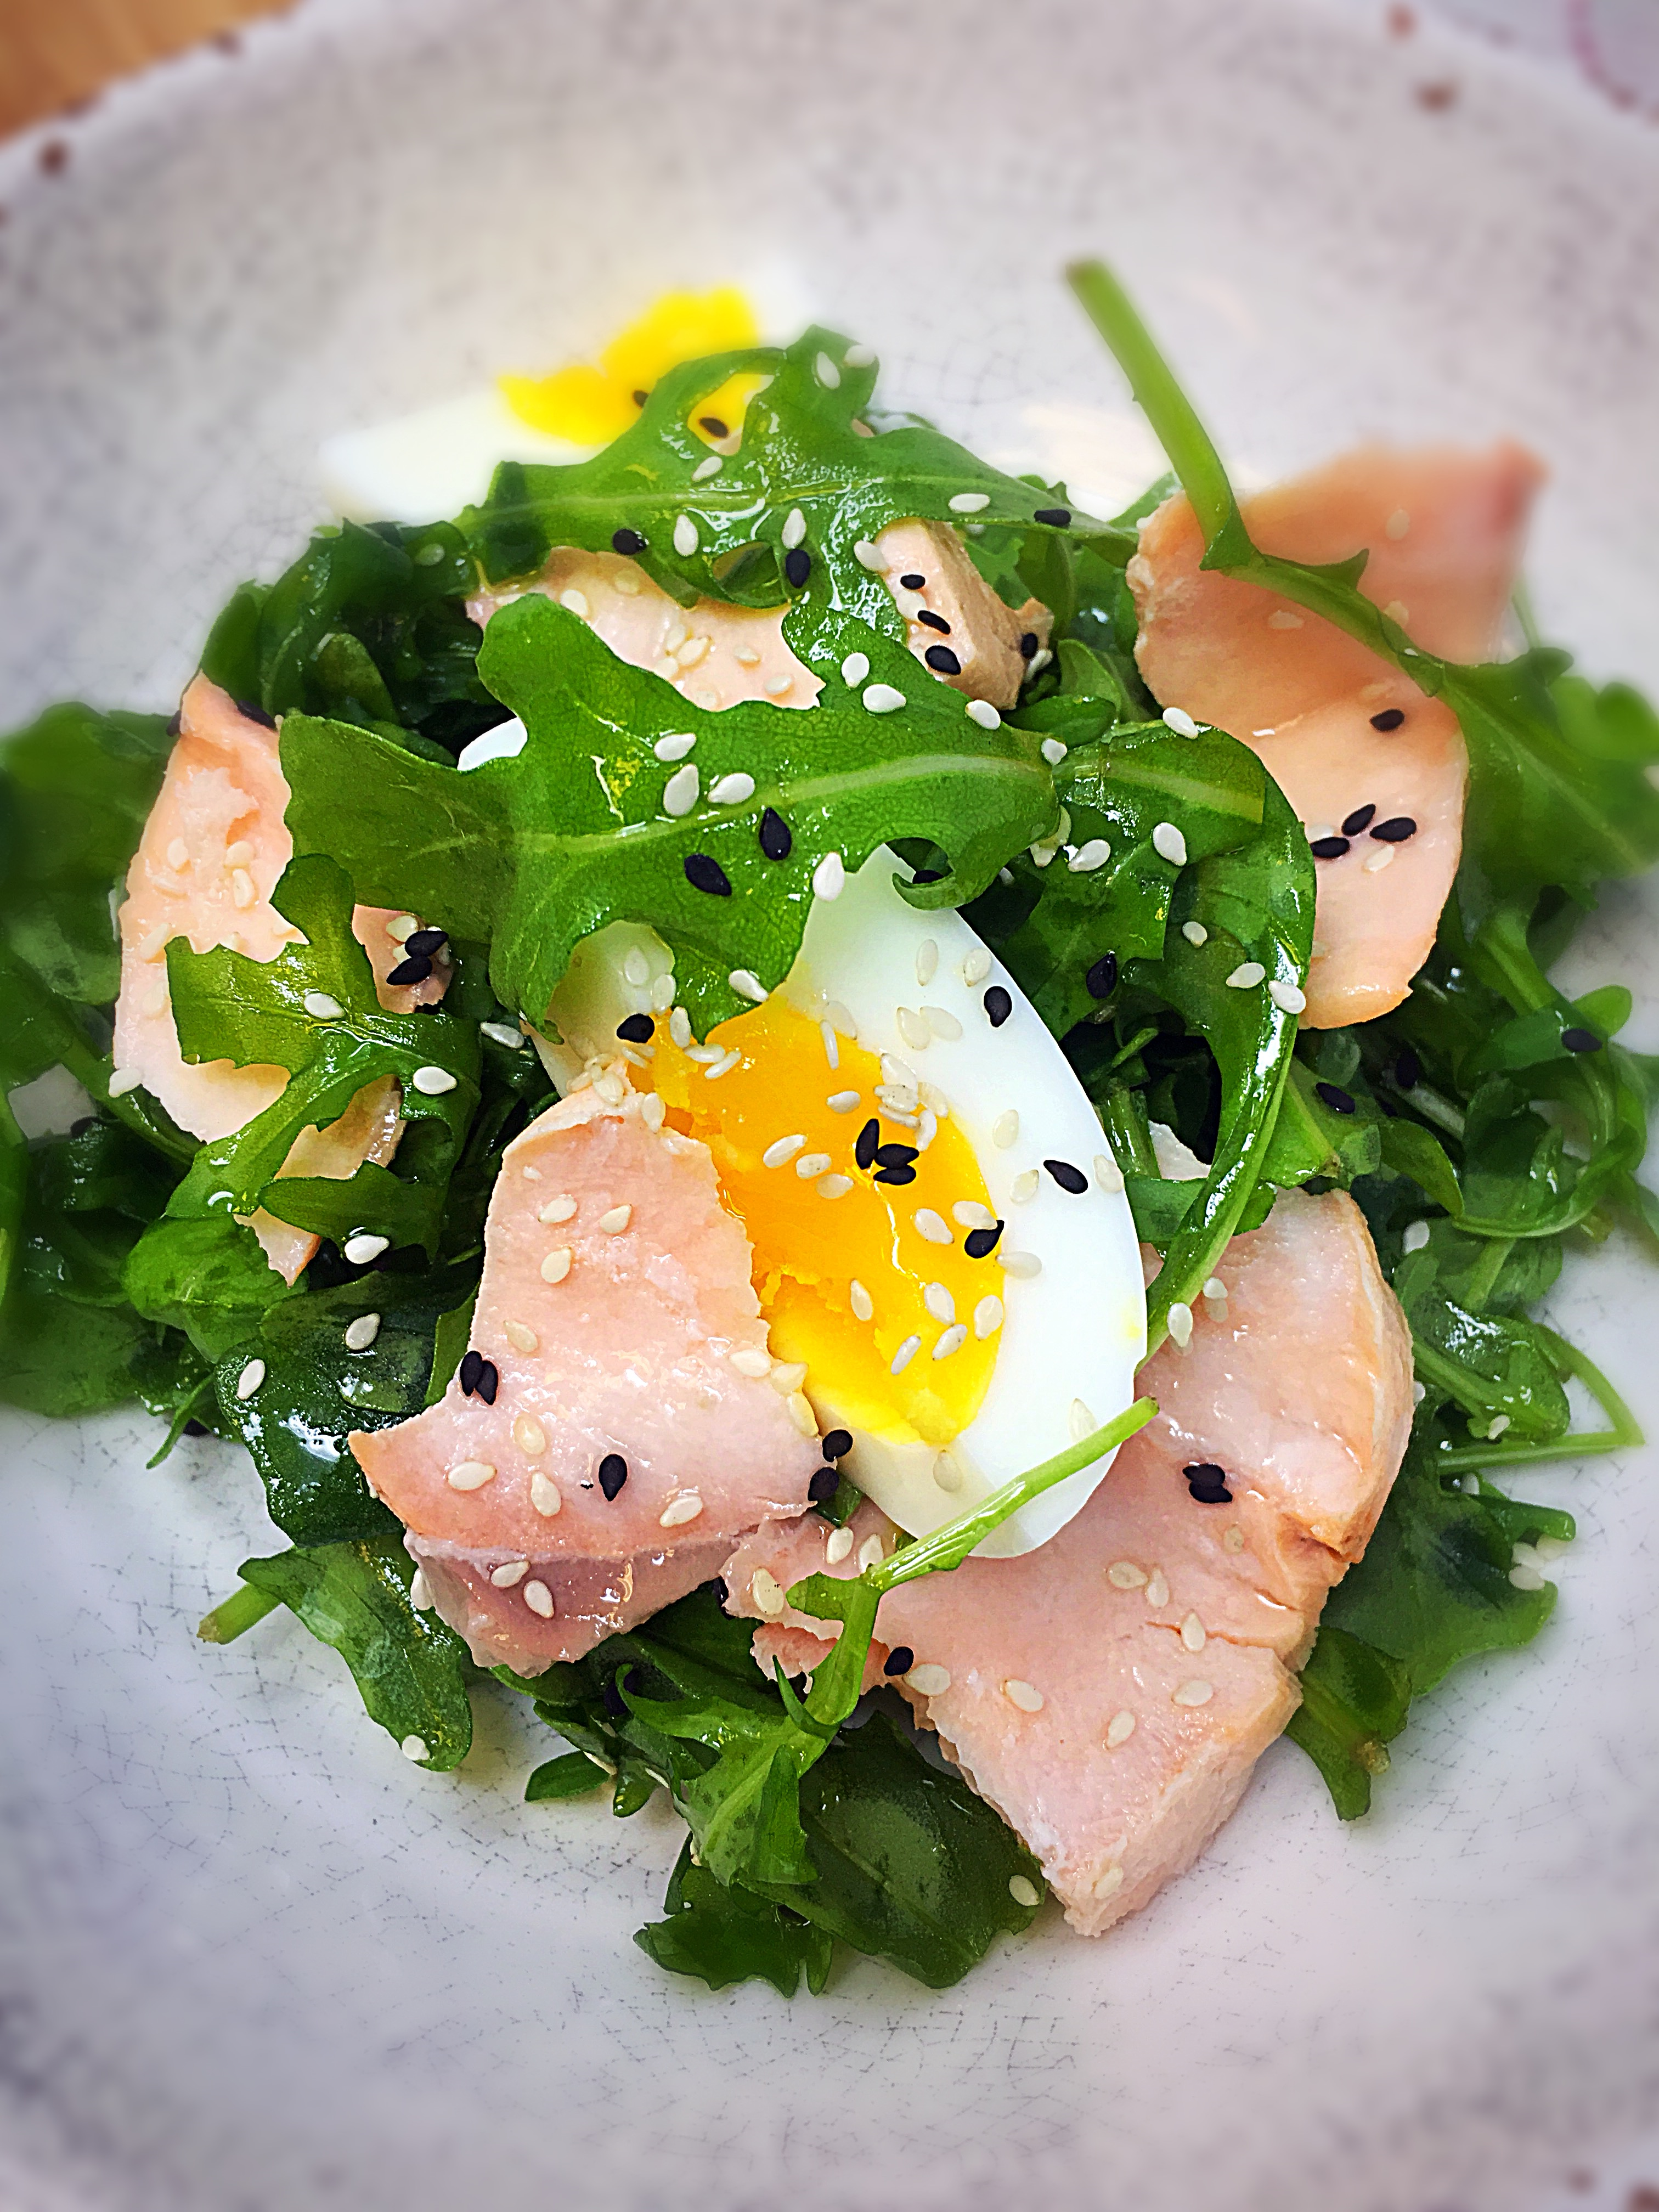 Flaked Poached Salmon with Arugula Salad & Soft Boiled Eggs